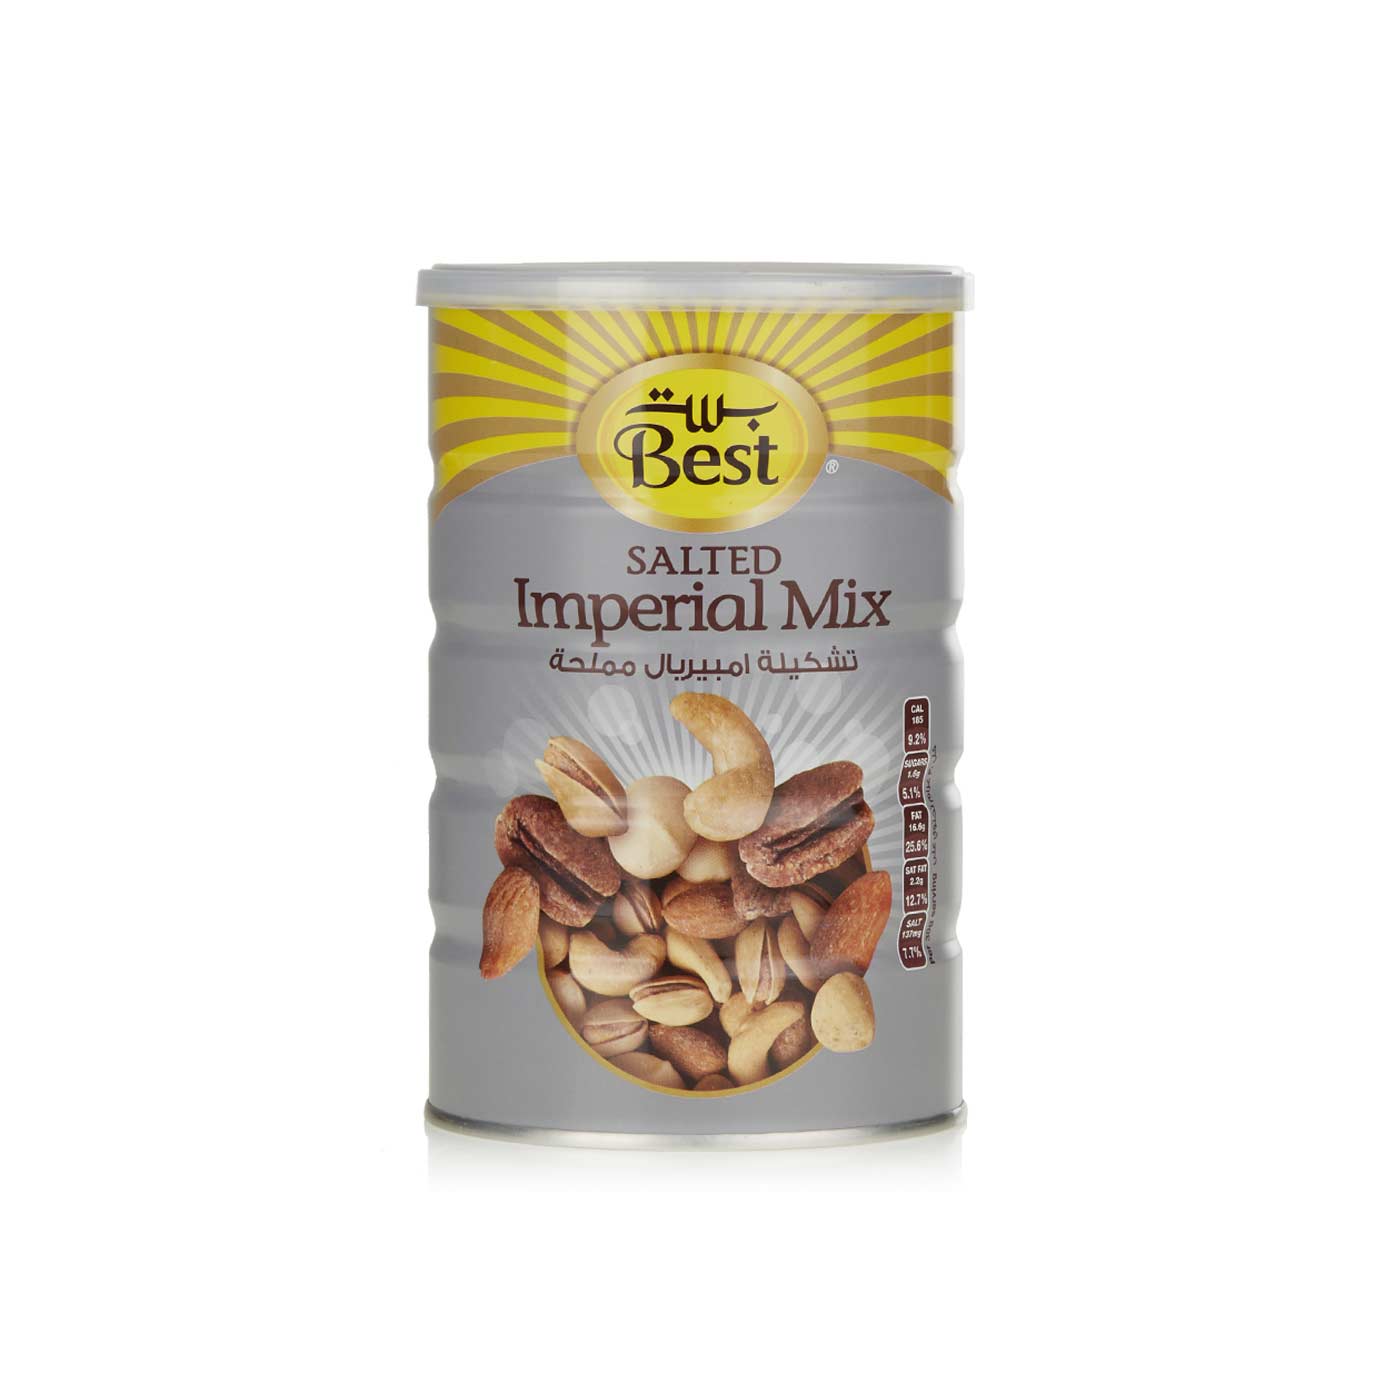 Best Salted Imperial Mix Nuts 400g Spinneys Uae